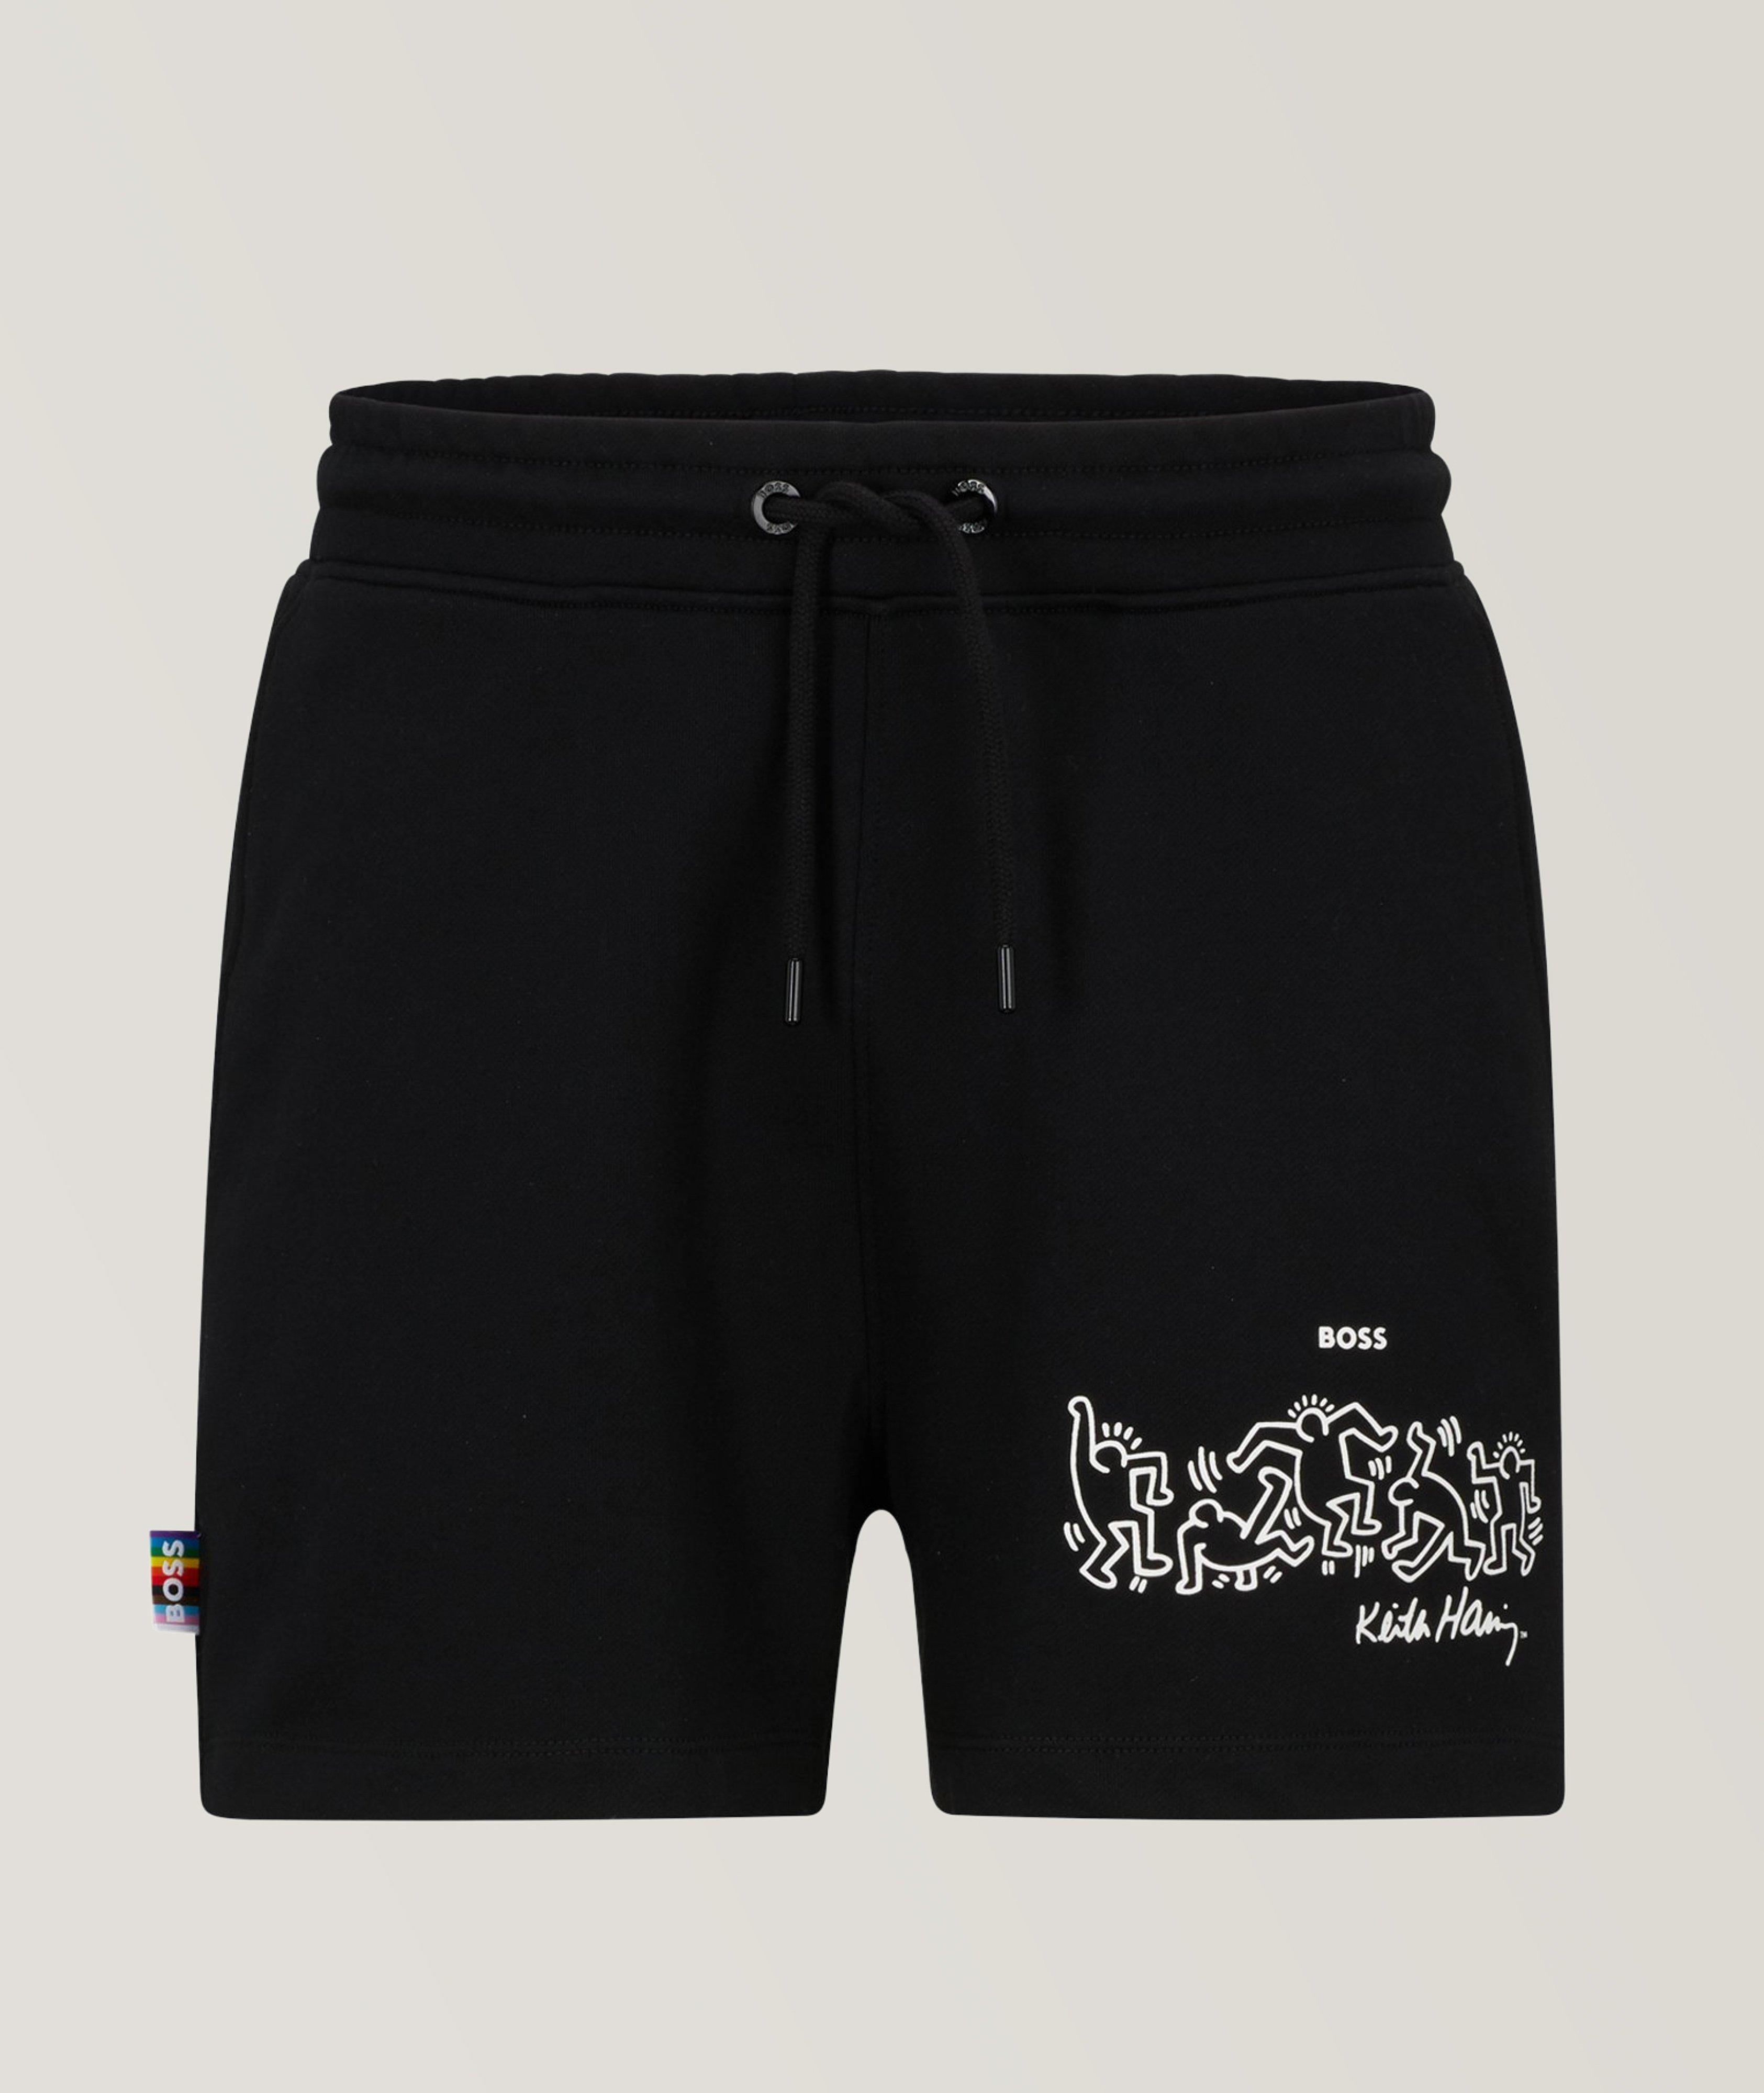 BOSS BOSS Legends Keith Haring Collection Terry Cotton Shorts | Shorts ...